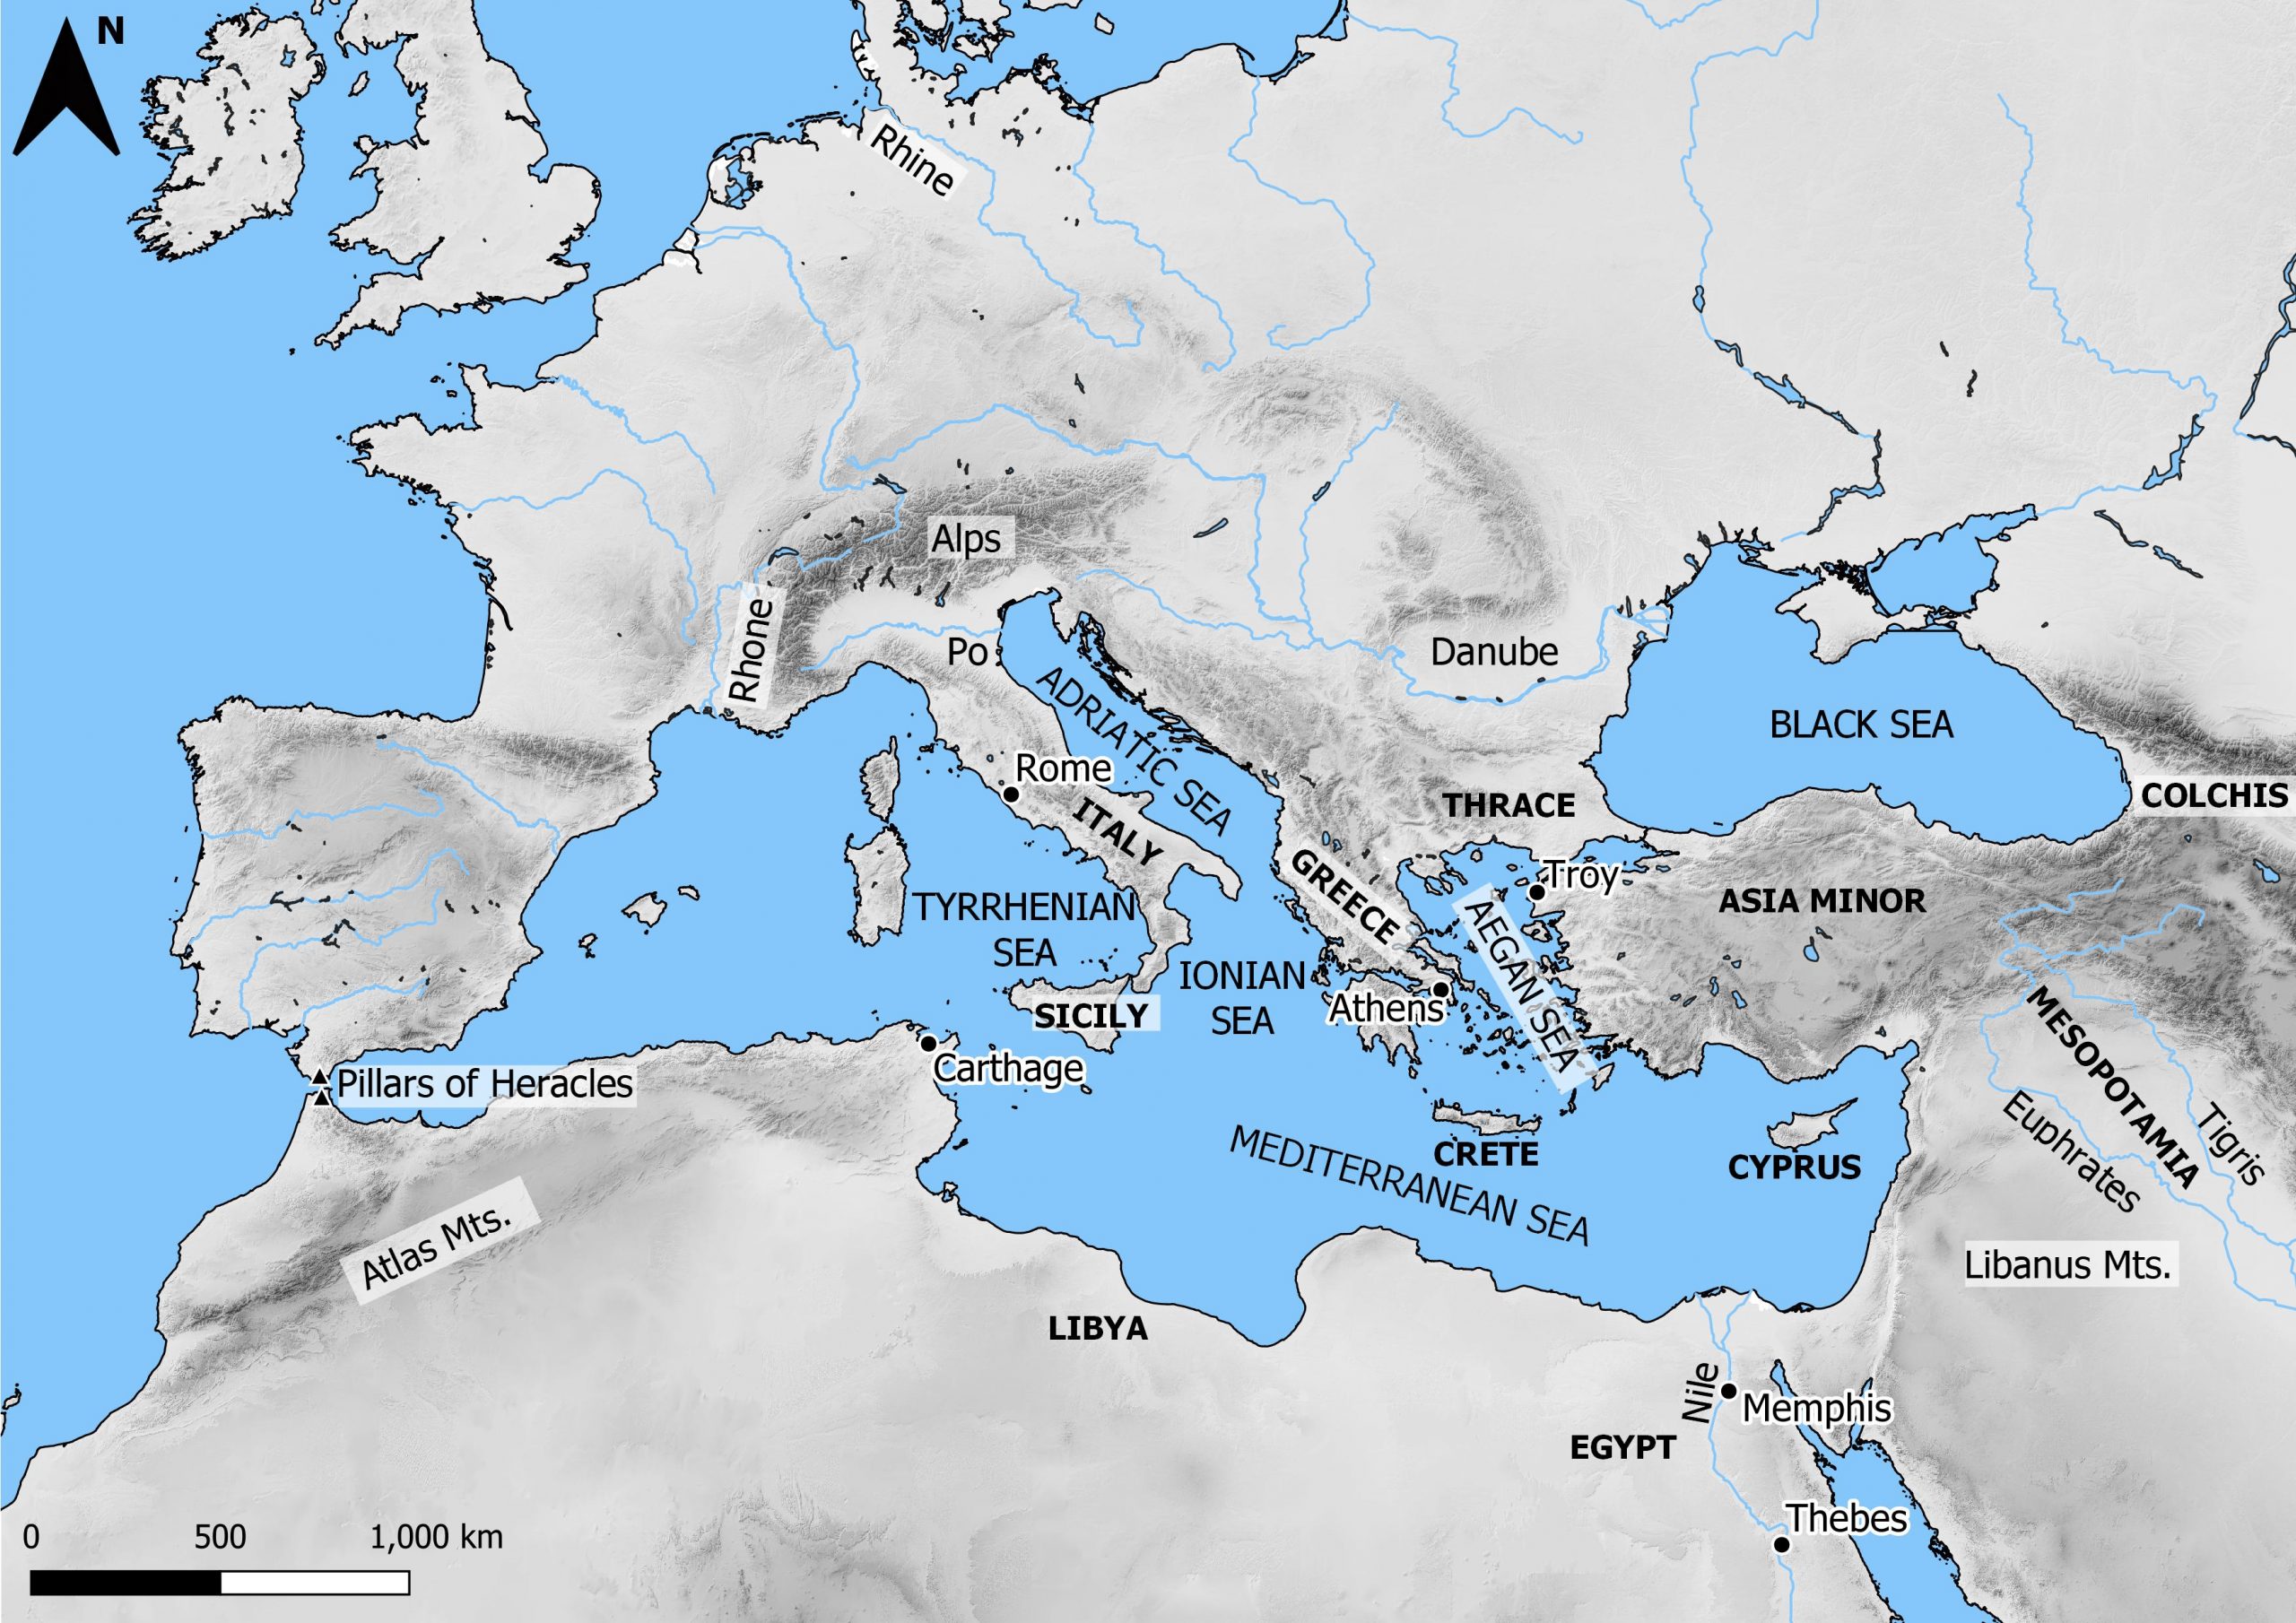 A map of the regions around the Mediterranean sea and Black sea, including North Africa, Europe, and West Asia.